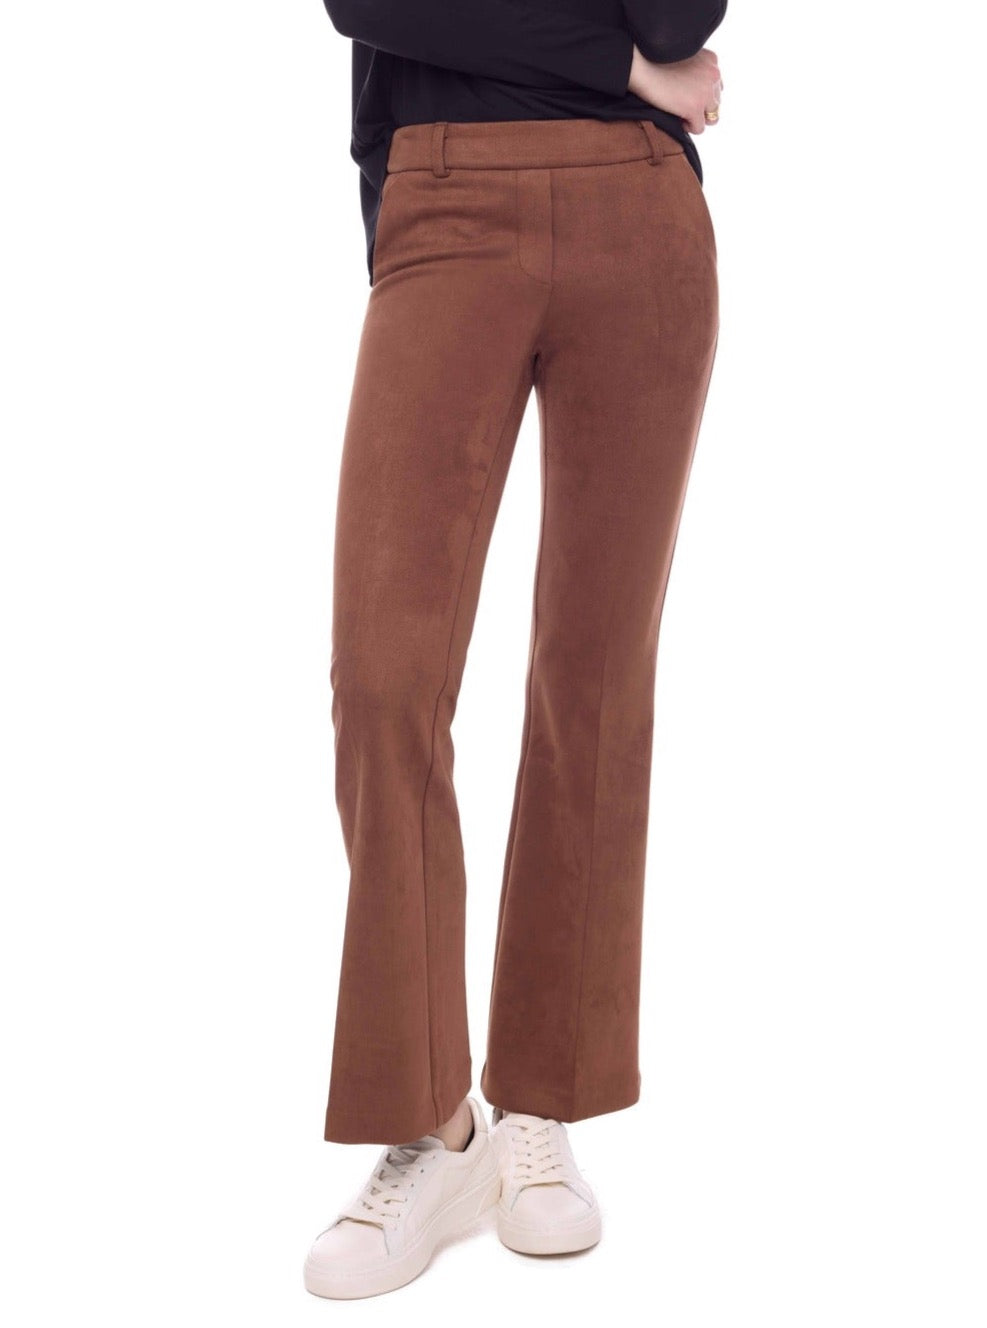 I Love Tyler Madison Paityn Stretch Suede Boot Cut Pant in Tobacco